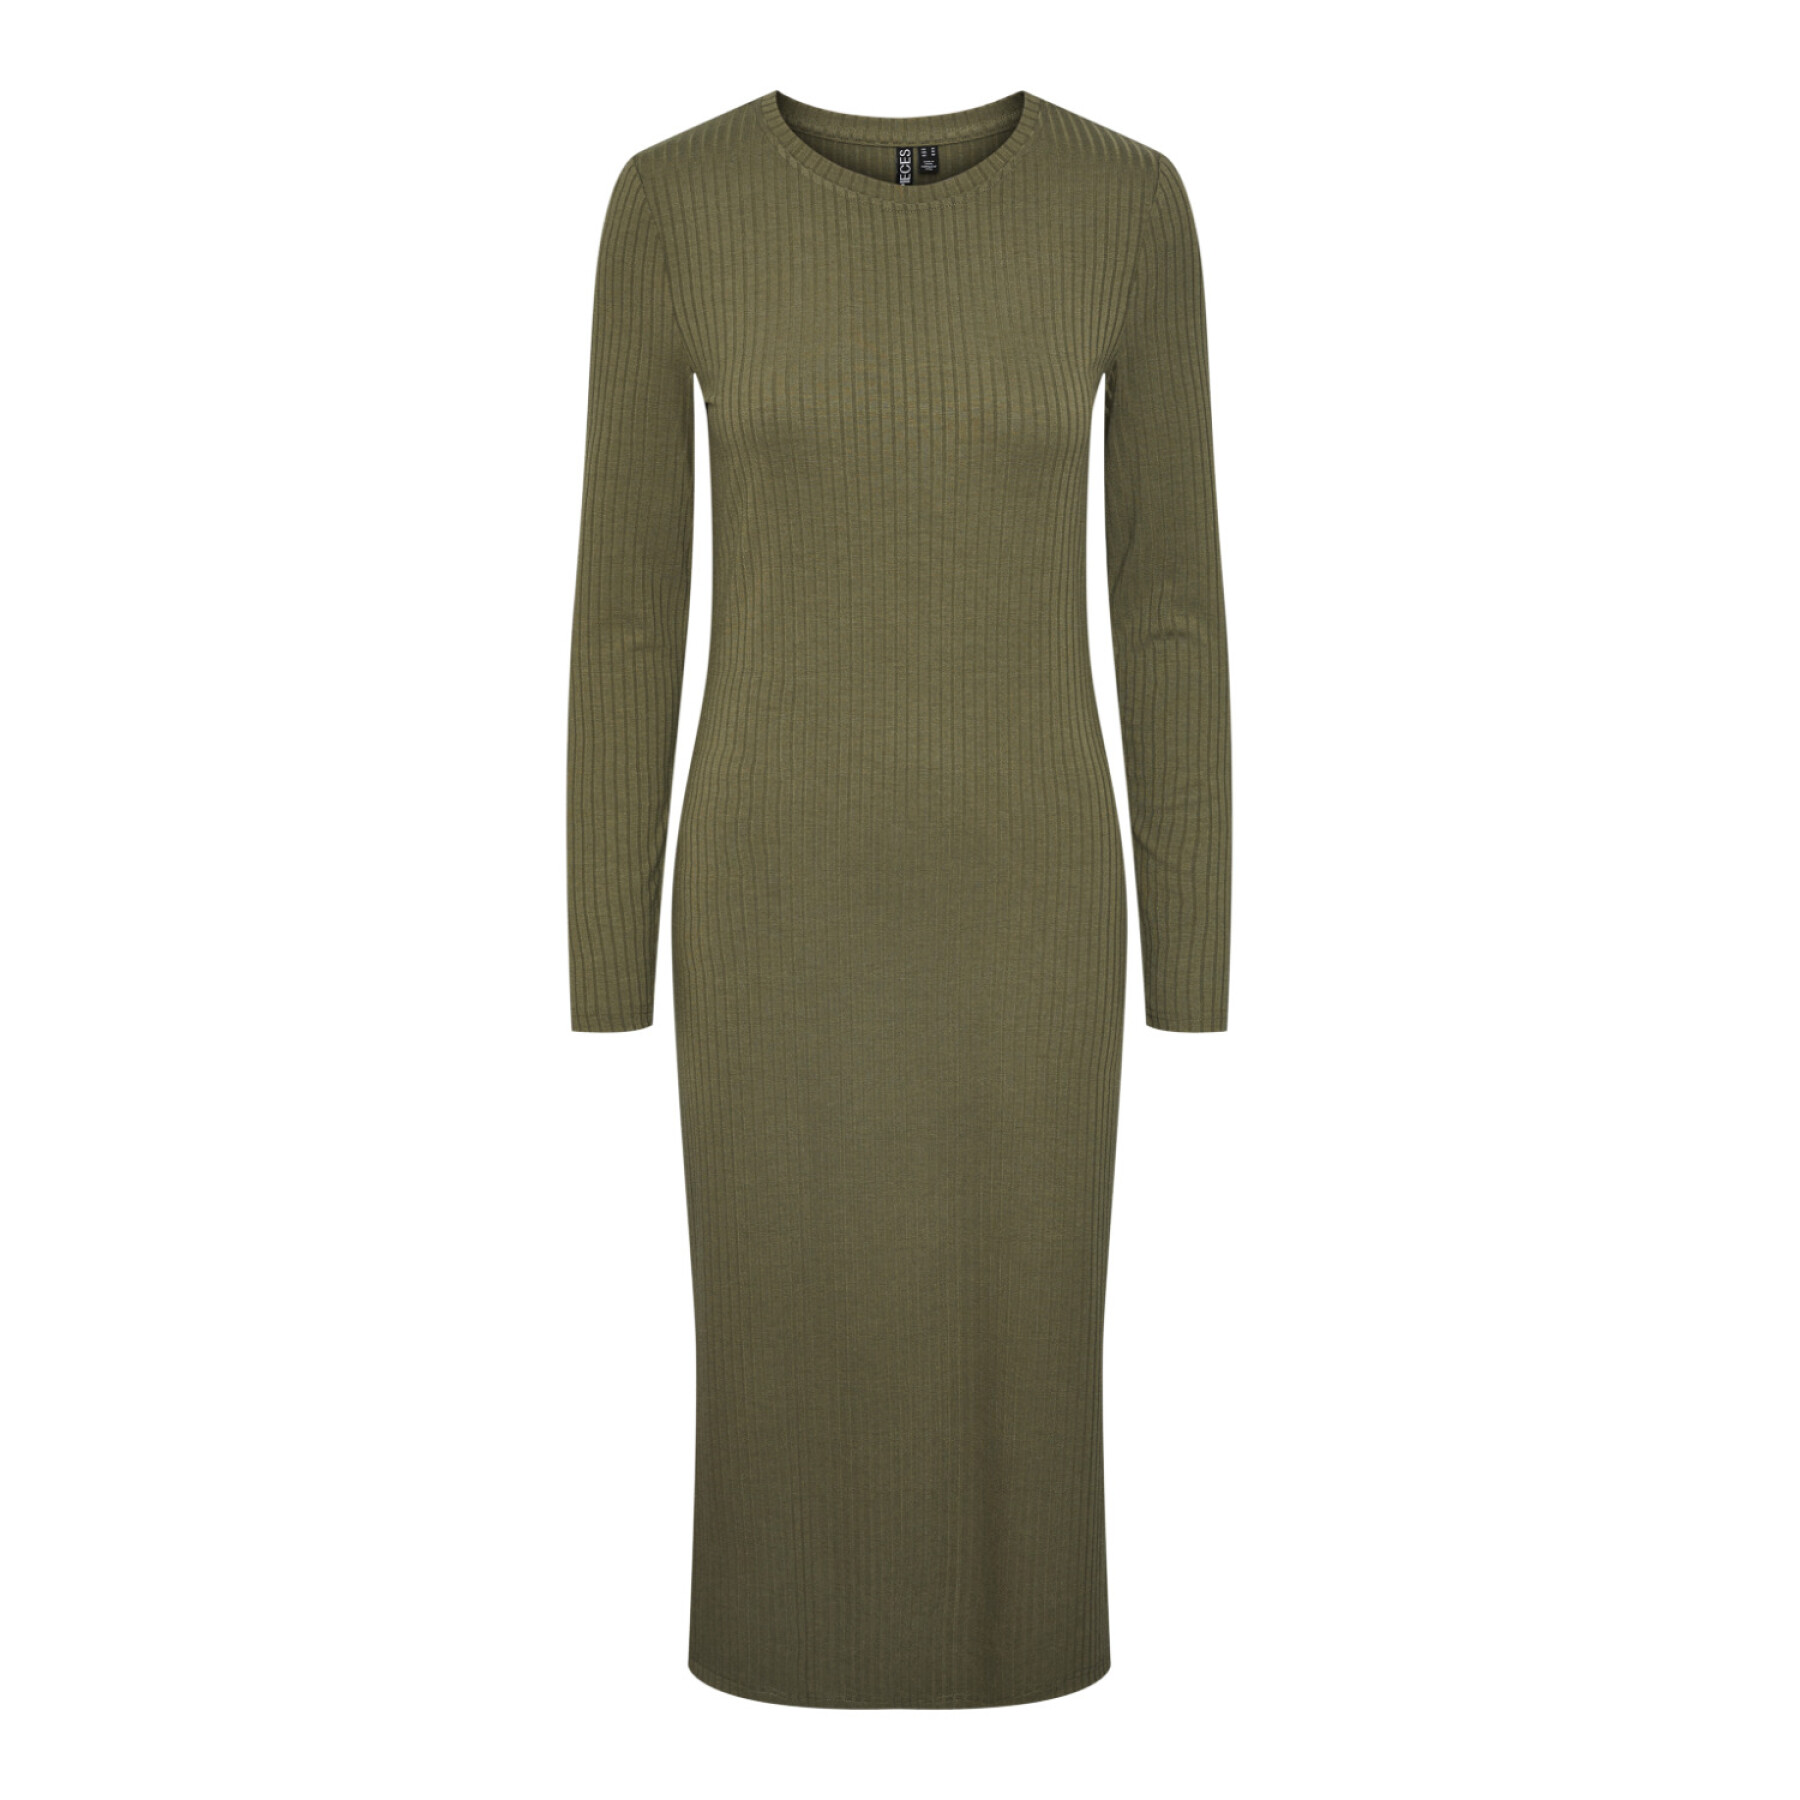 Women's long-sleeve round-neck dress Pieces Kylie